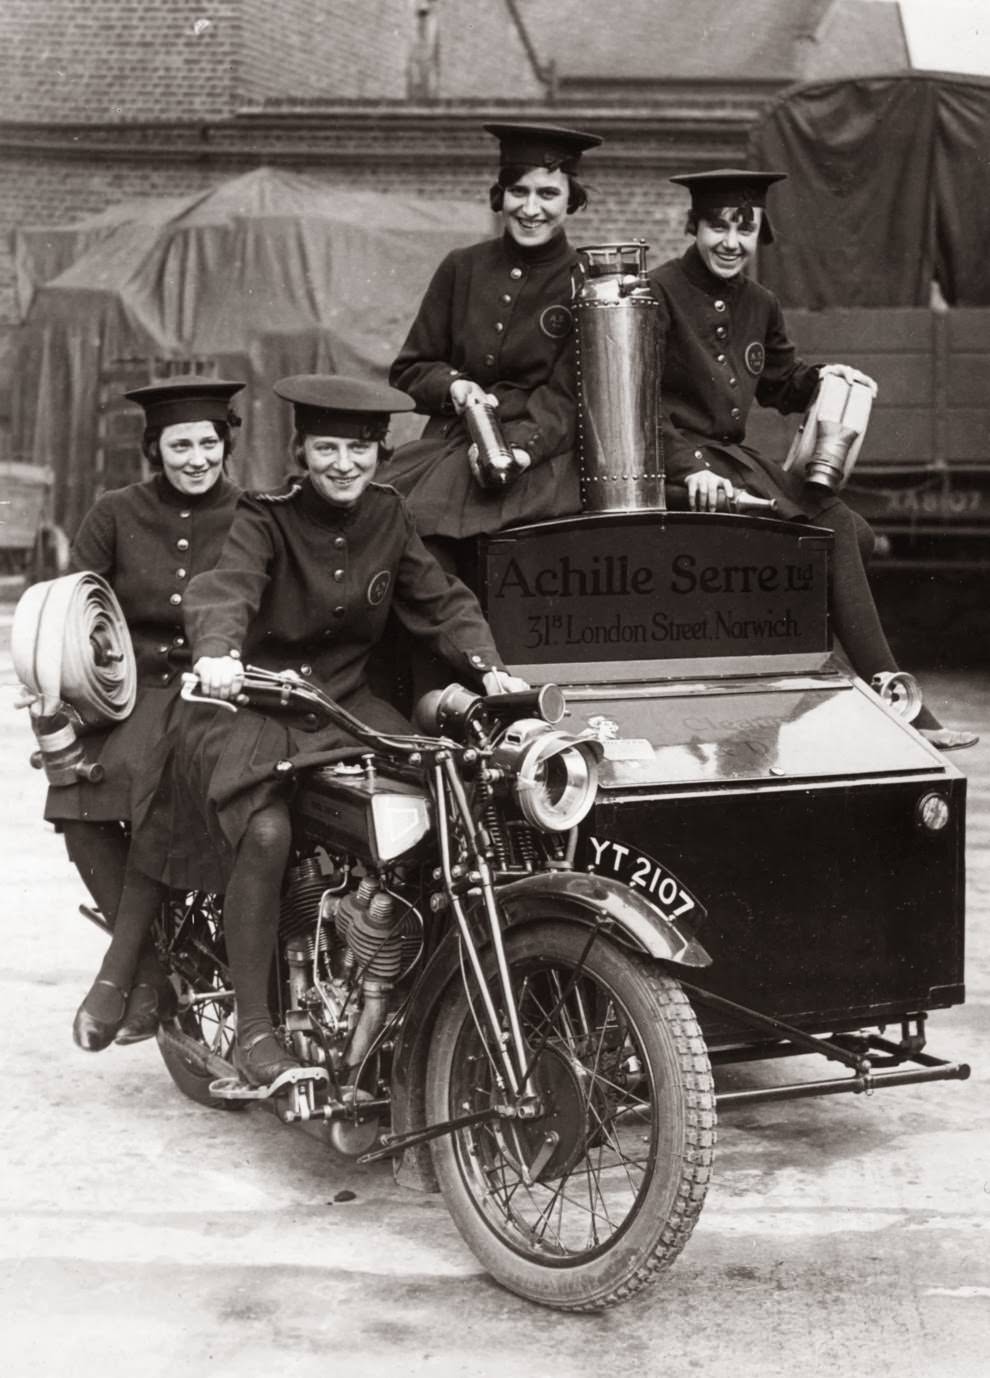 Women of achille serre ltd’s private fire brigade setting off on their motorcycle and sidecar to compete in the london private fire brigades’ tournament, 1925.